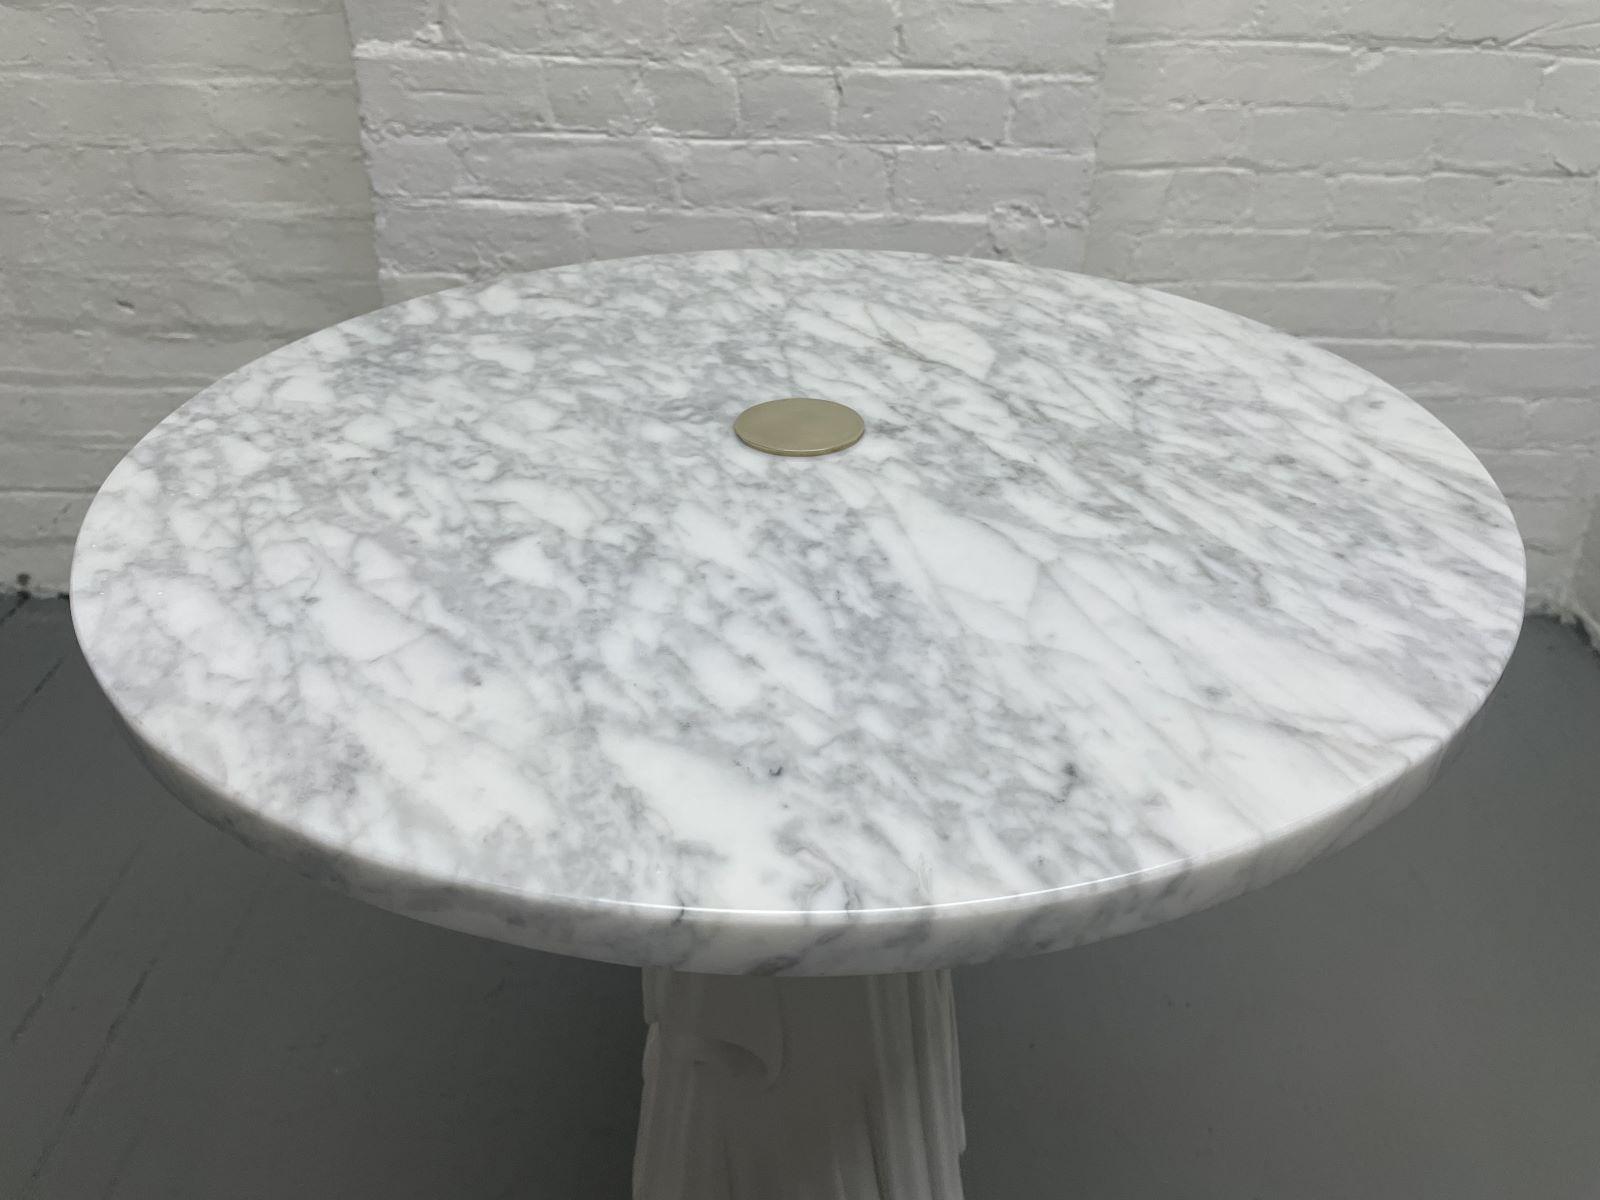 Decorative Carrara marble top Hollywood Regency side table. The table has a painted white solid wood base with a draped pattern. Has a round Carrara marble top with a central brass connector.